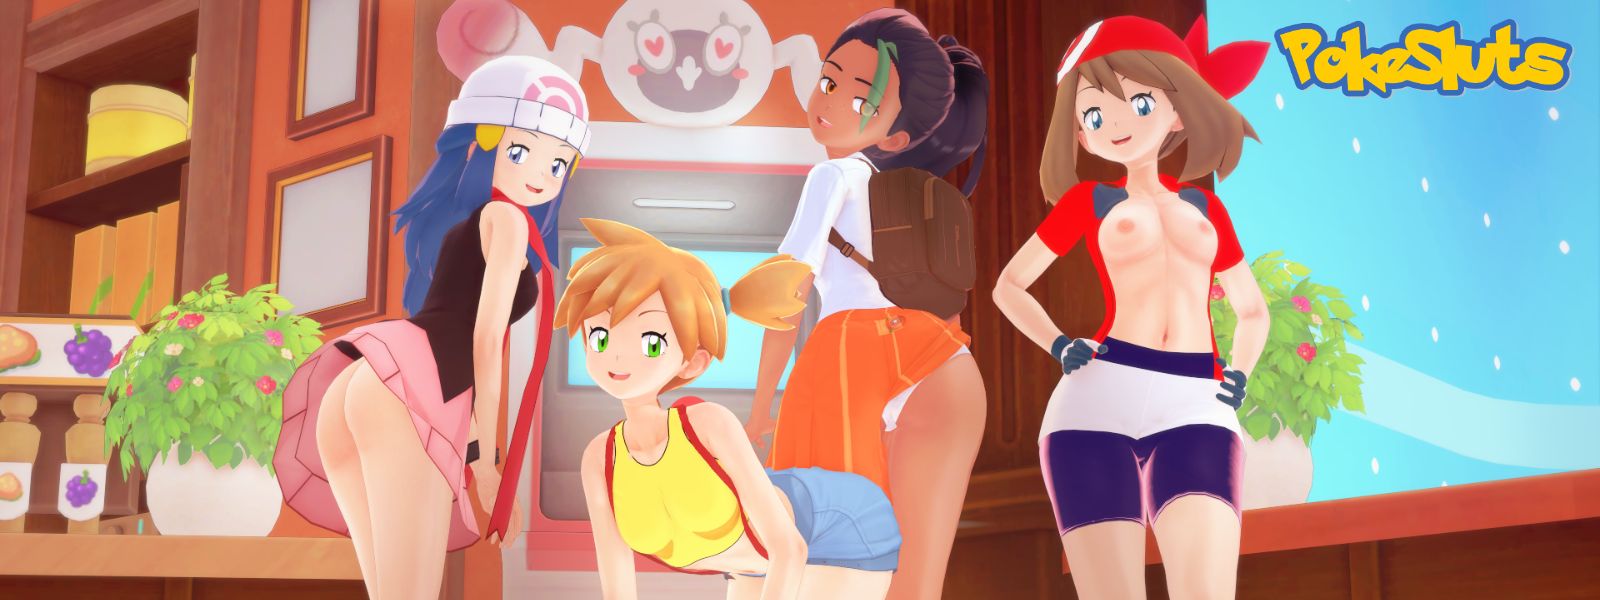 Pokesluts Adult Game Android Download (8)